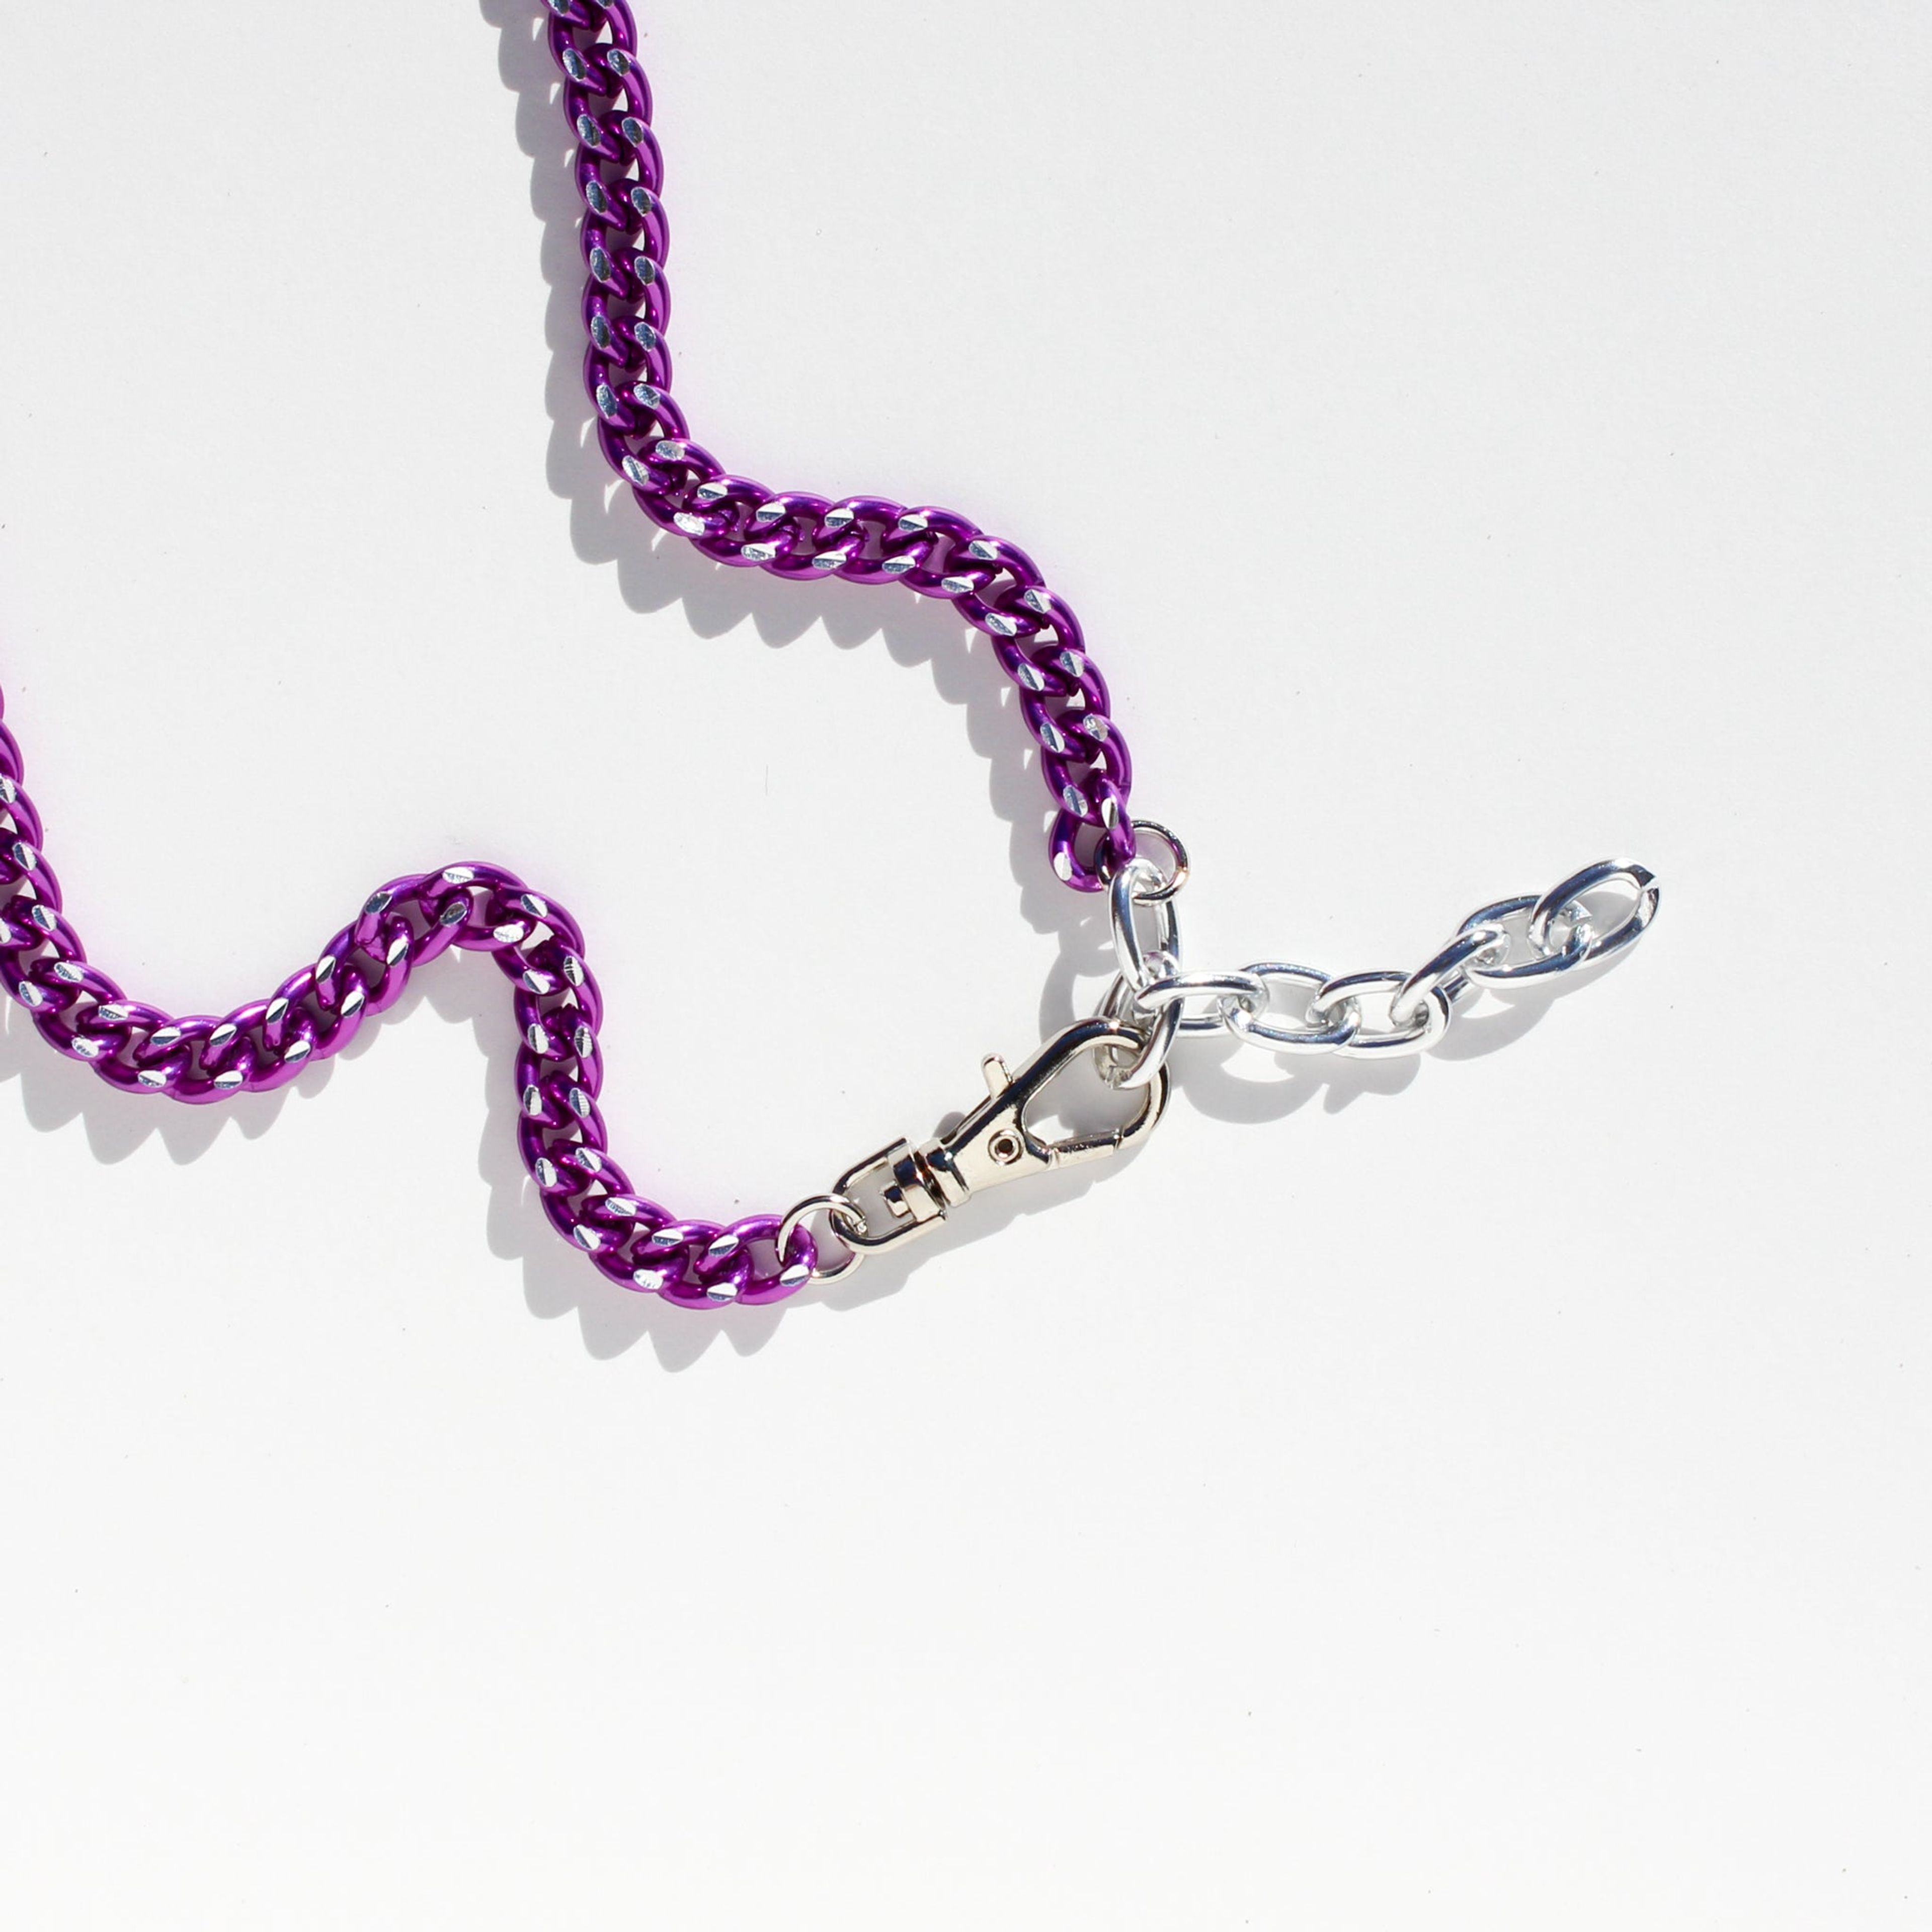 Curb chain necklaces